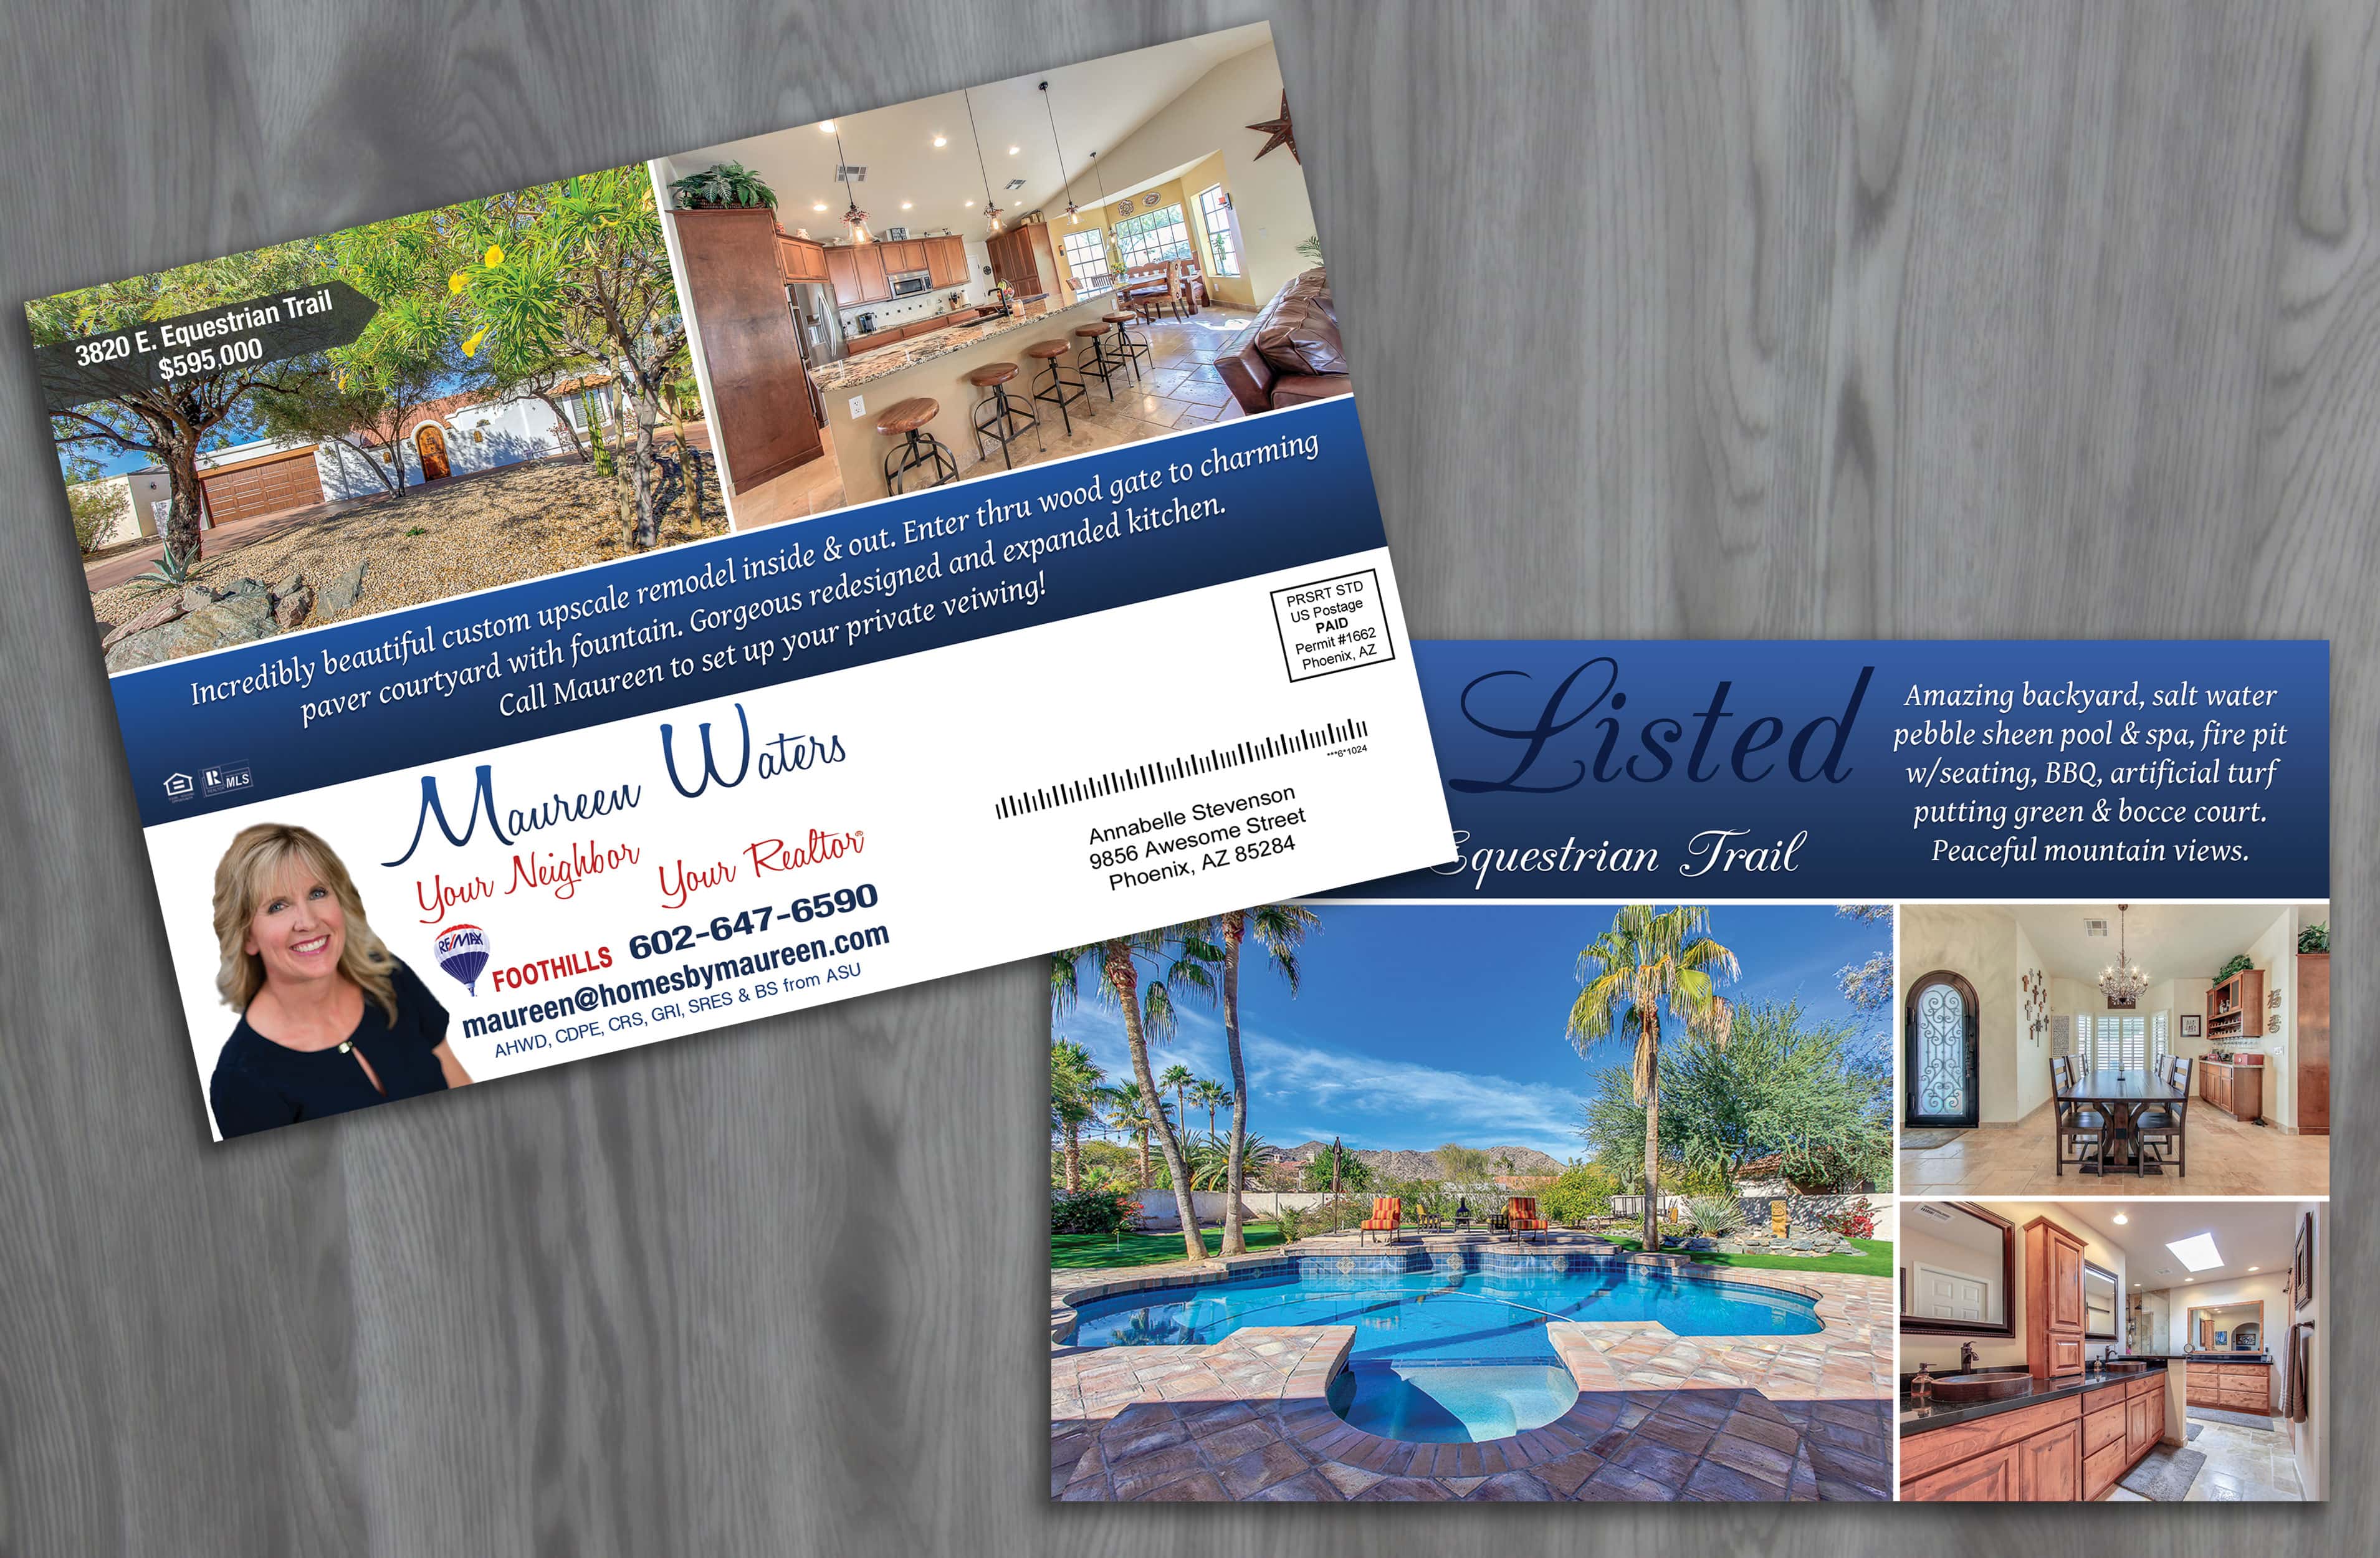 direct mail postcard examples